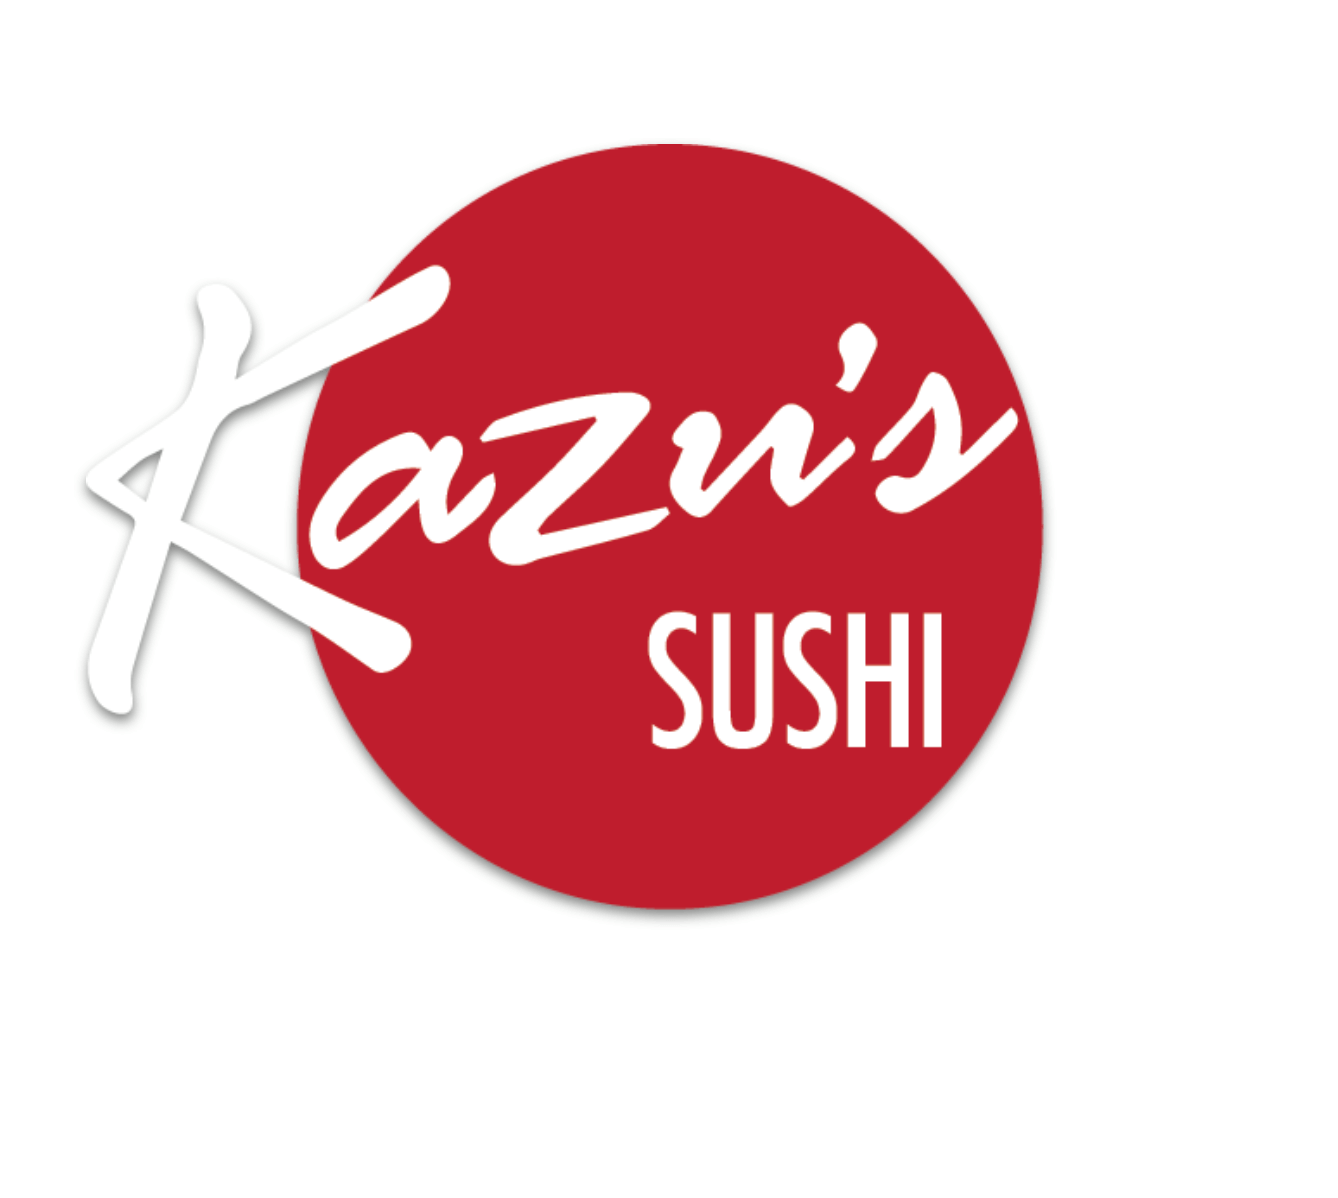 Kazu's Sushi Bar: A Taste of Japan in the Heart of Downtown New Port Richey